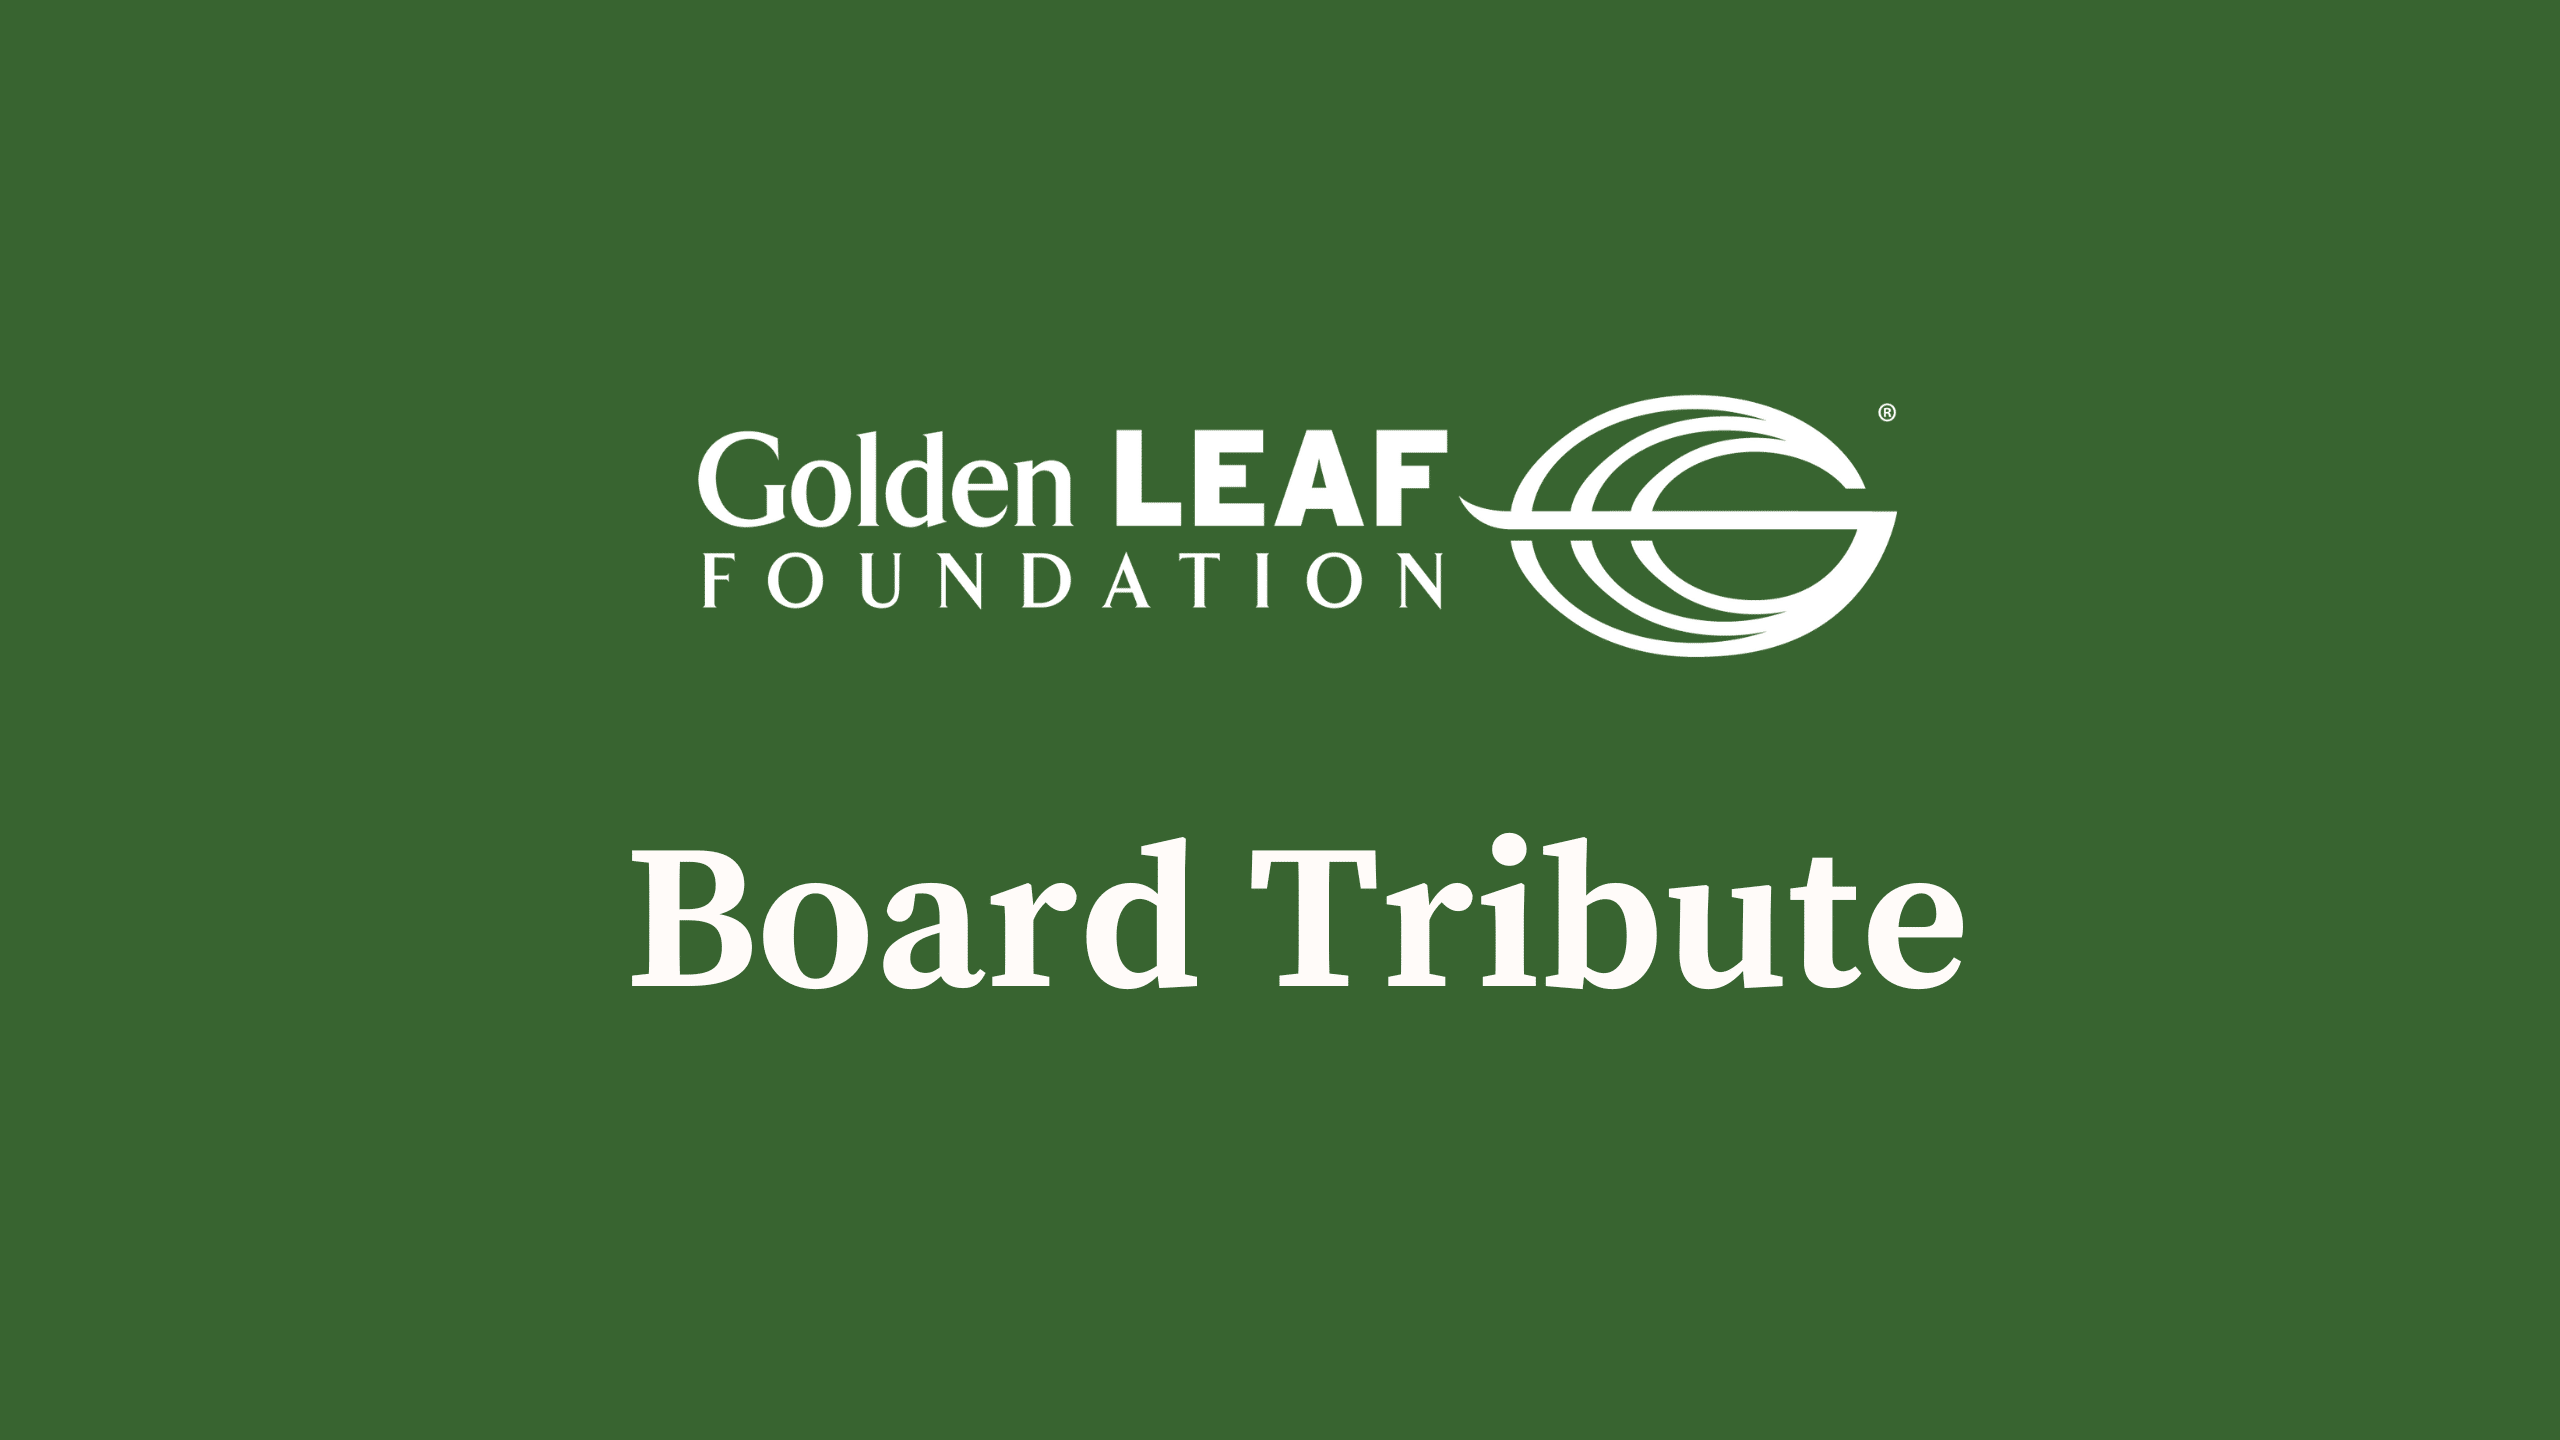 Remembering Golden LEAF Board Members Jerome Vick and Tommy Bunn